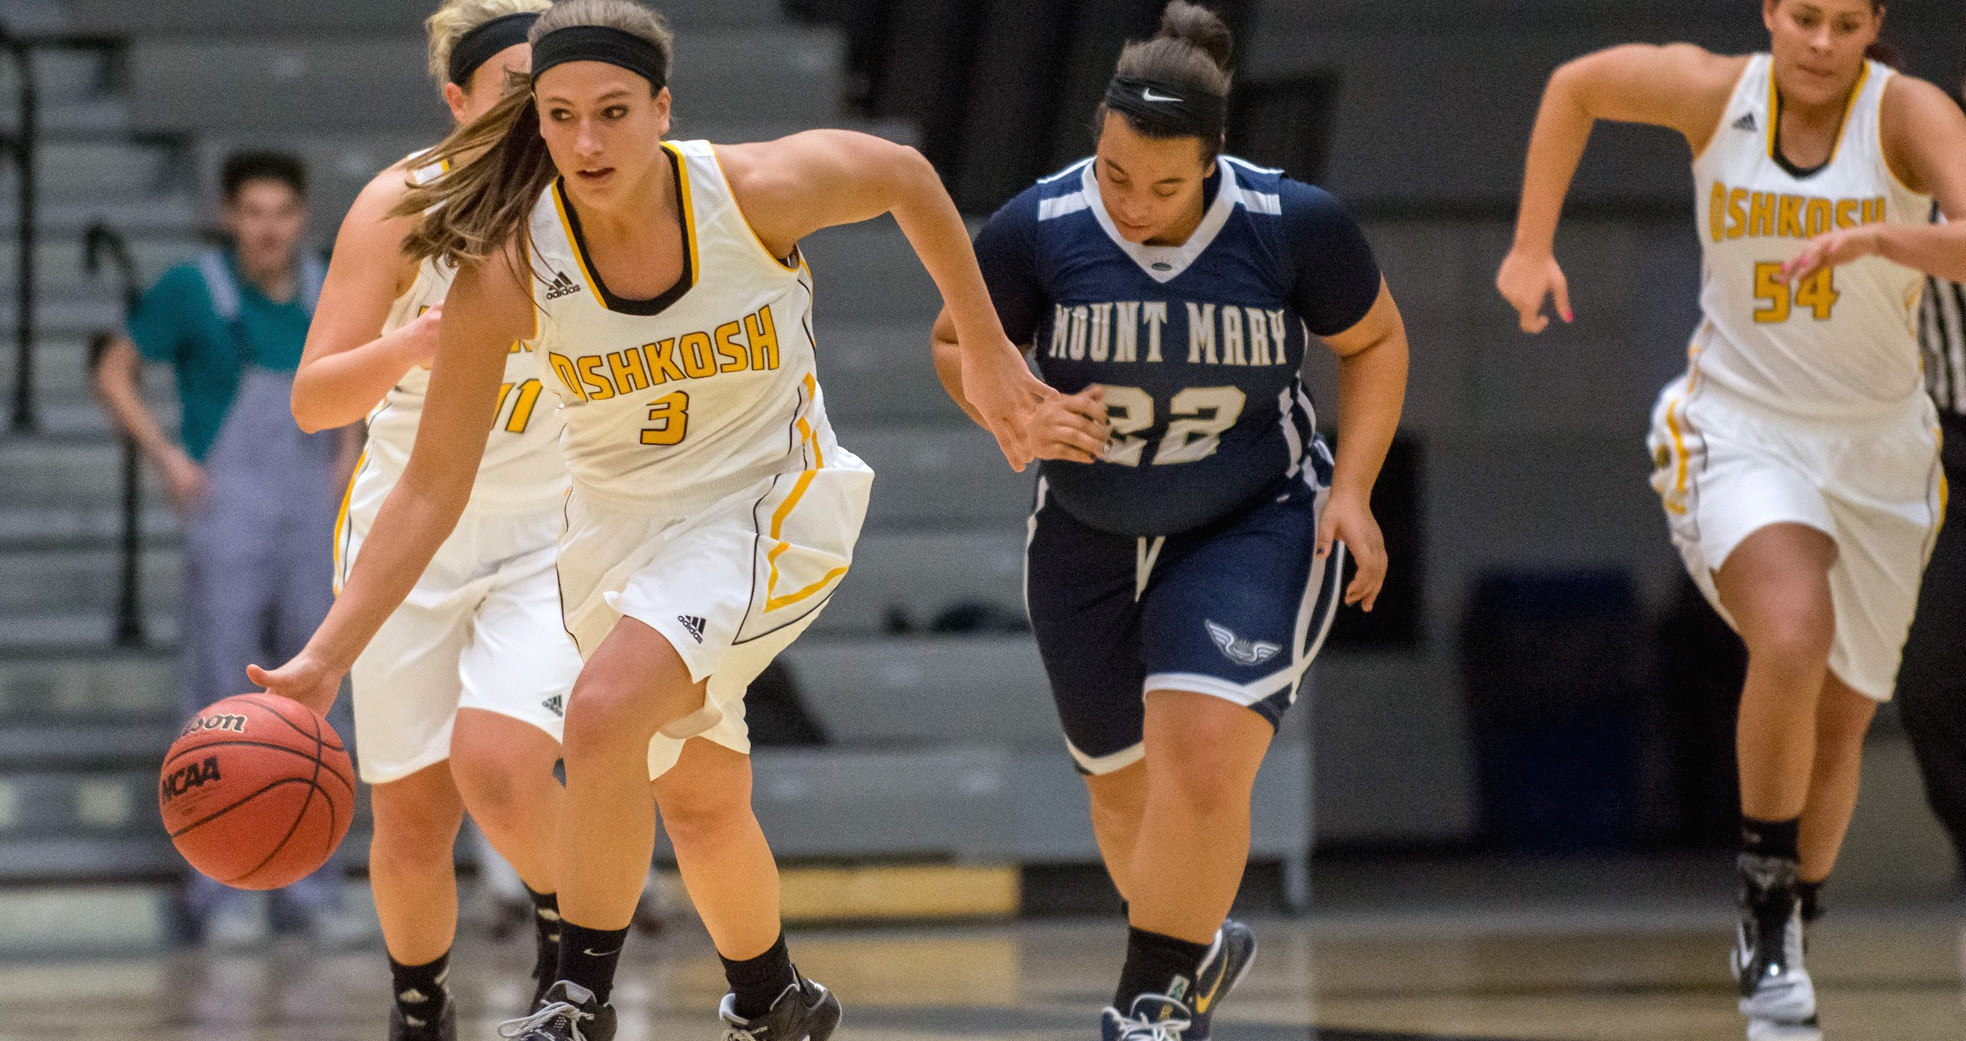 Lauren Peterson, who tallied seven points and three assists, brings the ball up court against the Blue Angels.